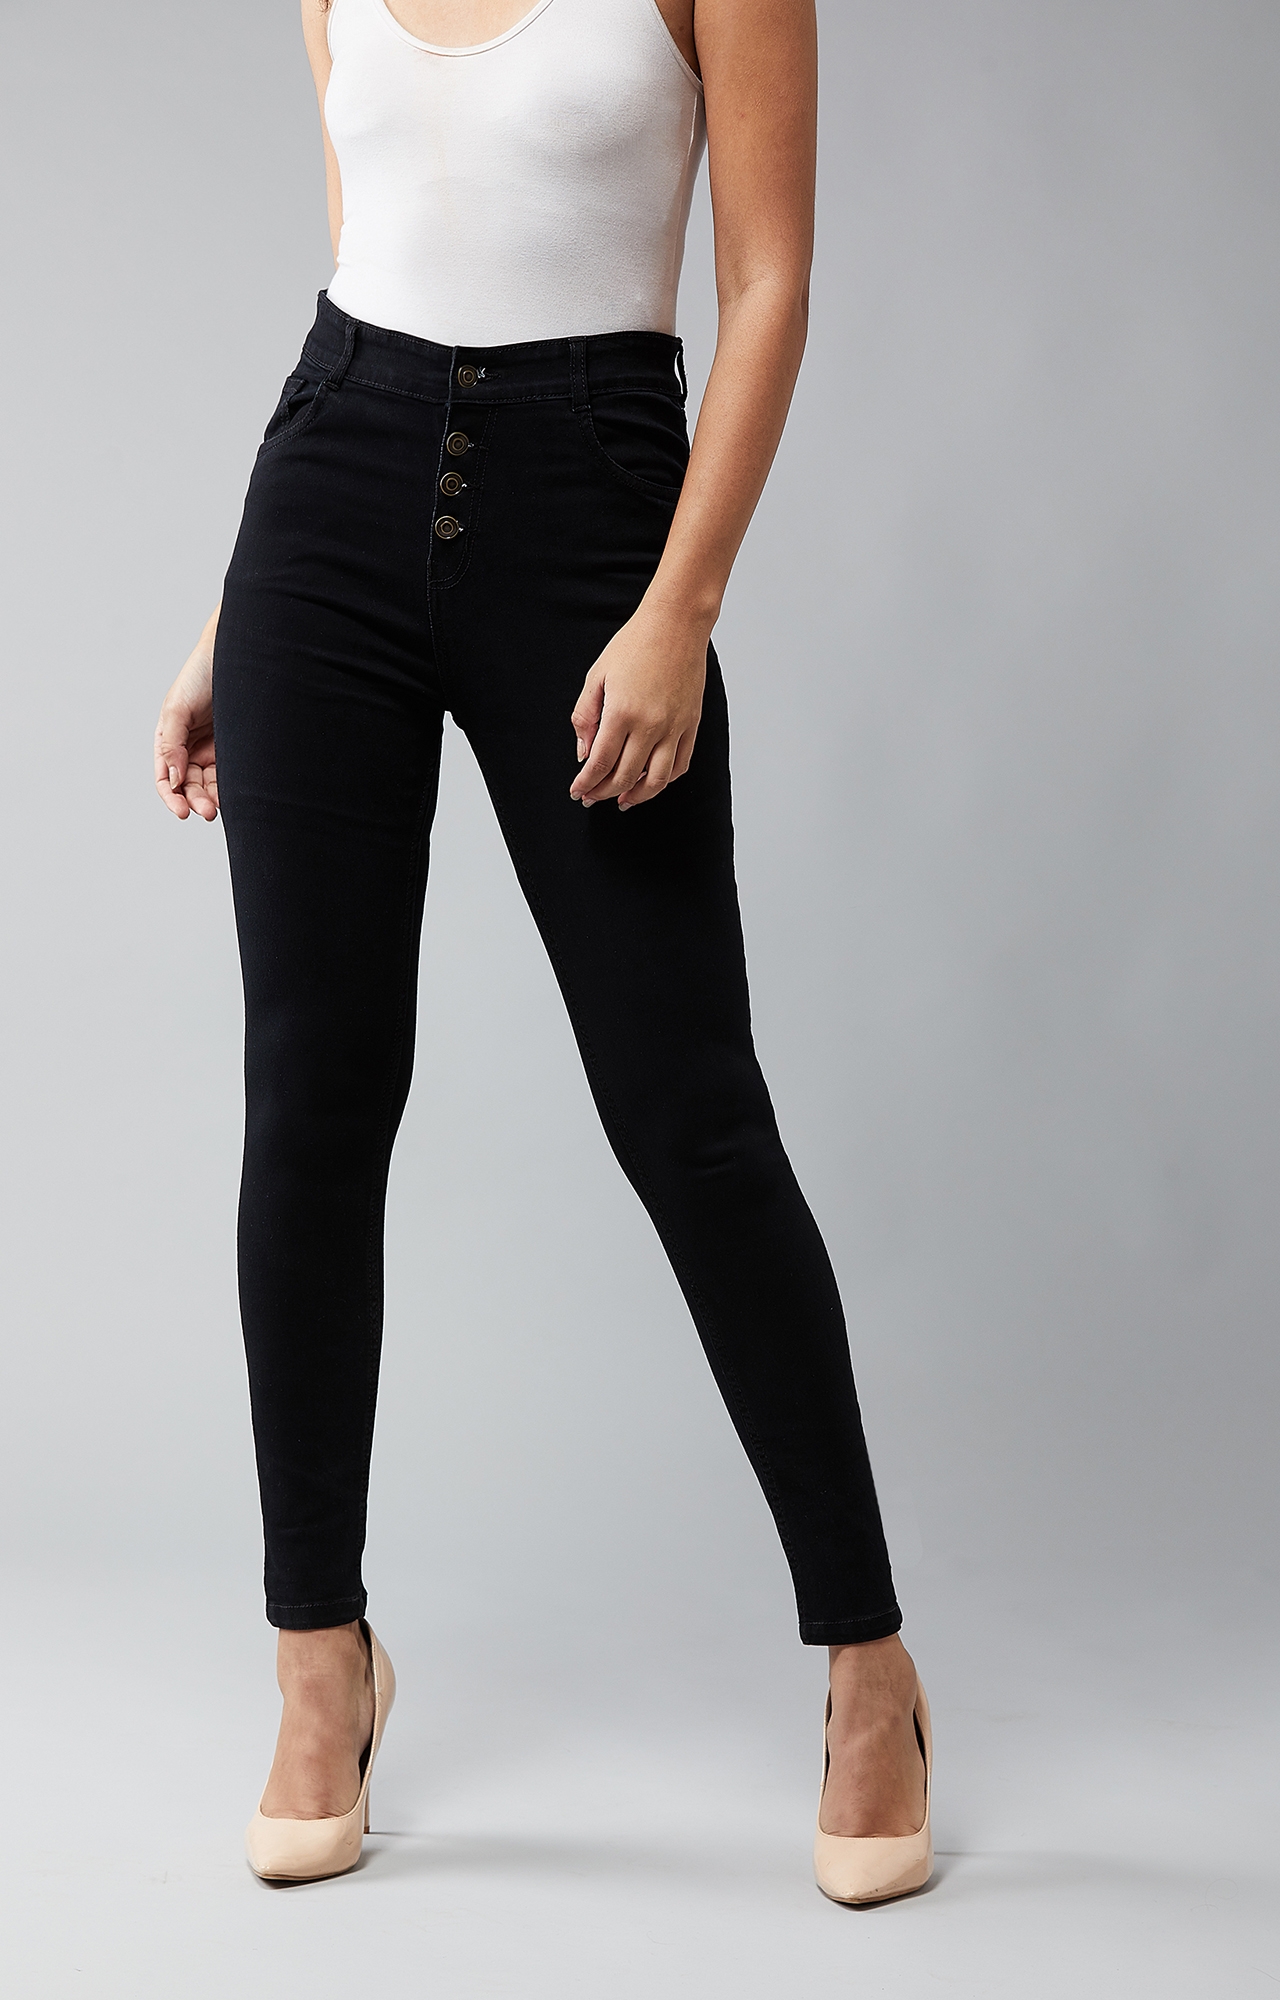 Dolce Crudo | Women's Black Skinny Fit High Rise Clean Look Regular Length Stretchable Denim Jeans